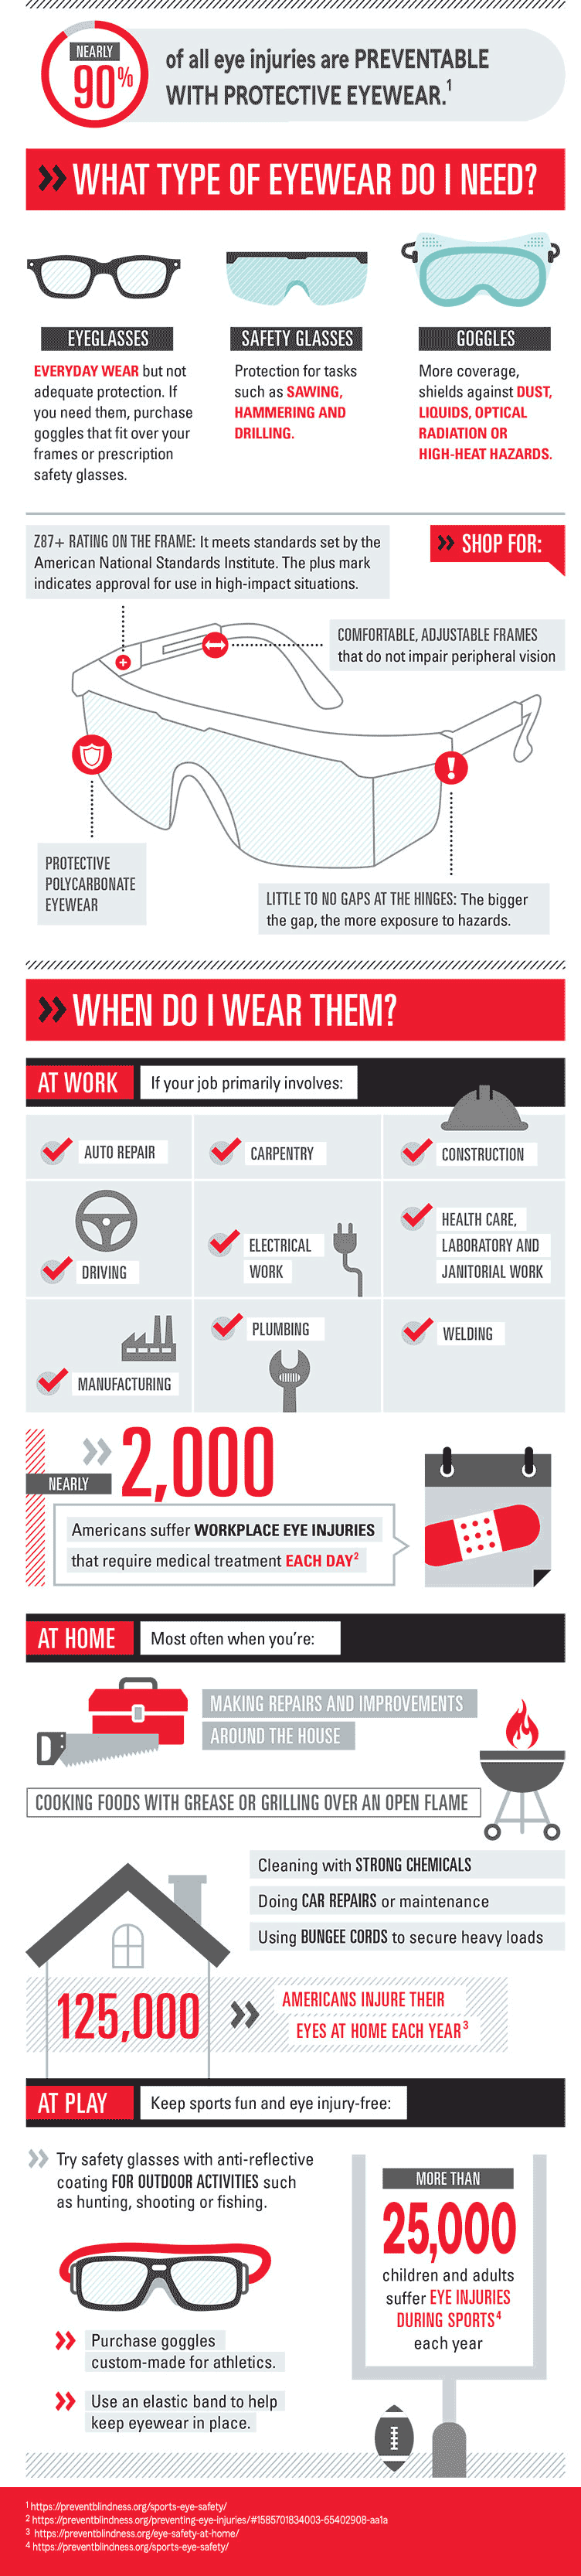 Why and how to wear safety glasses. A full description of this infographic is available below.